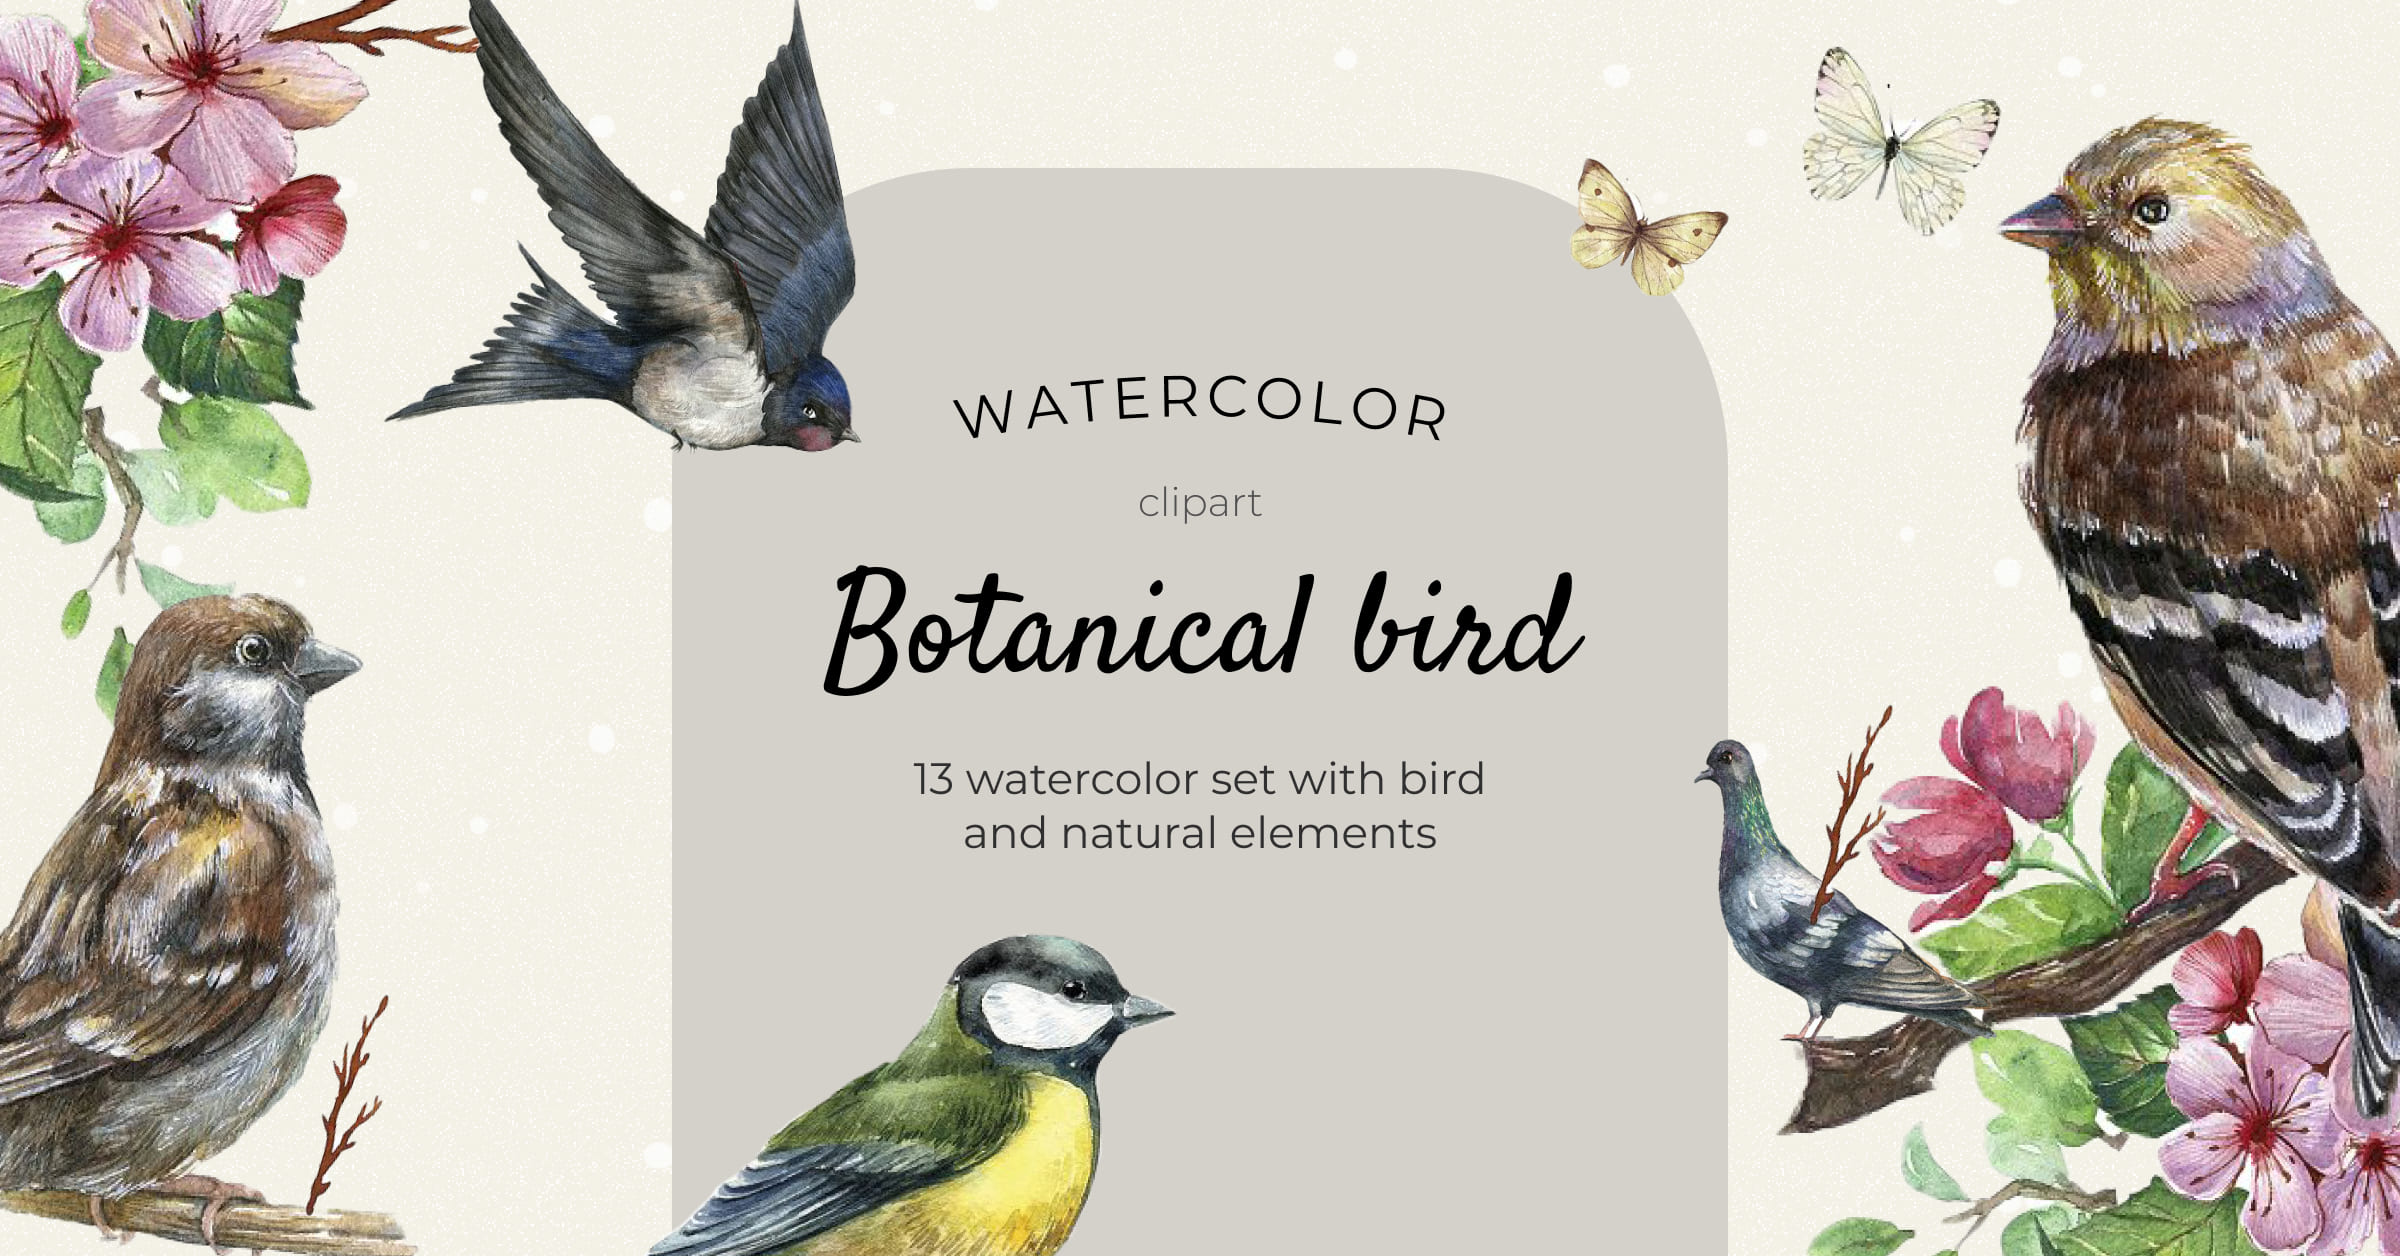 Watercolor botanical bird clipart - Facebook page preview.